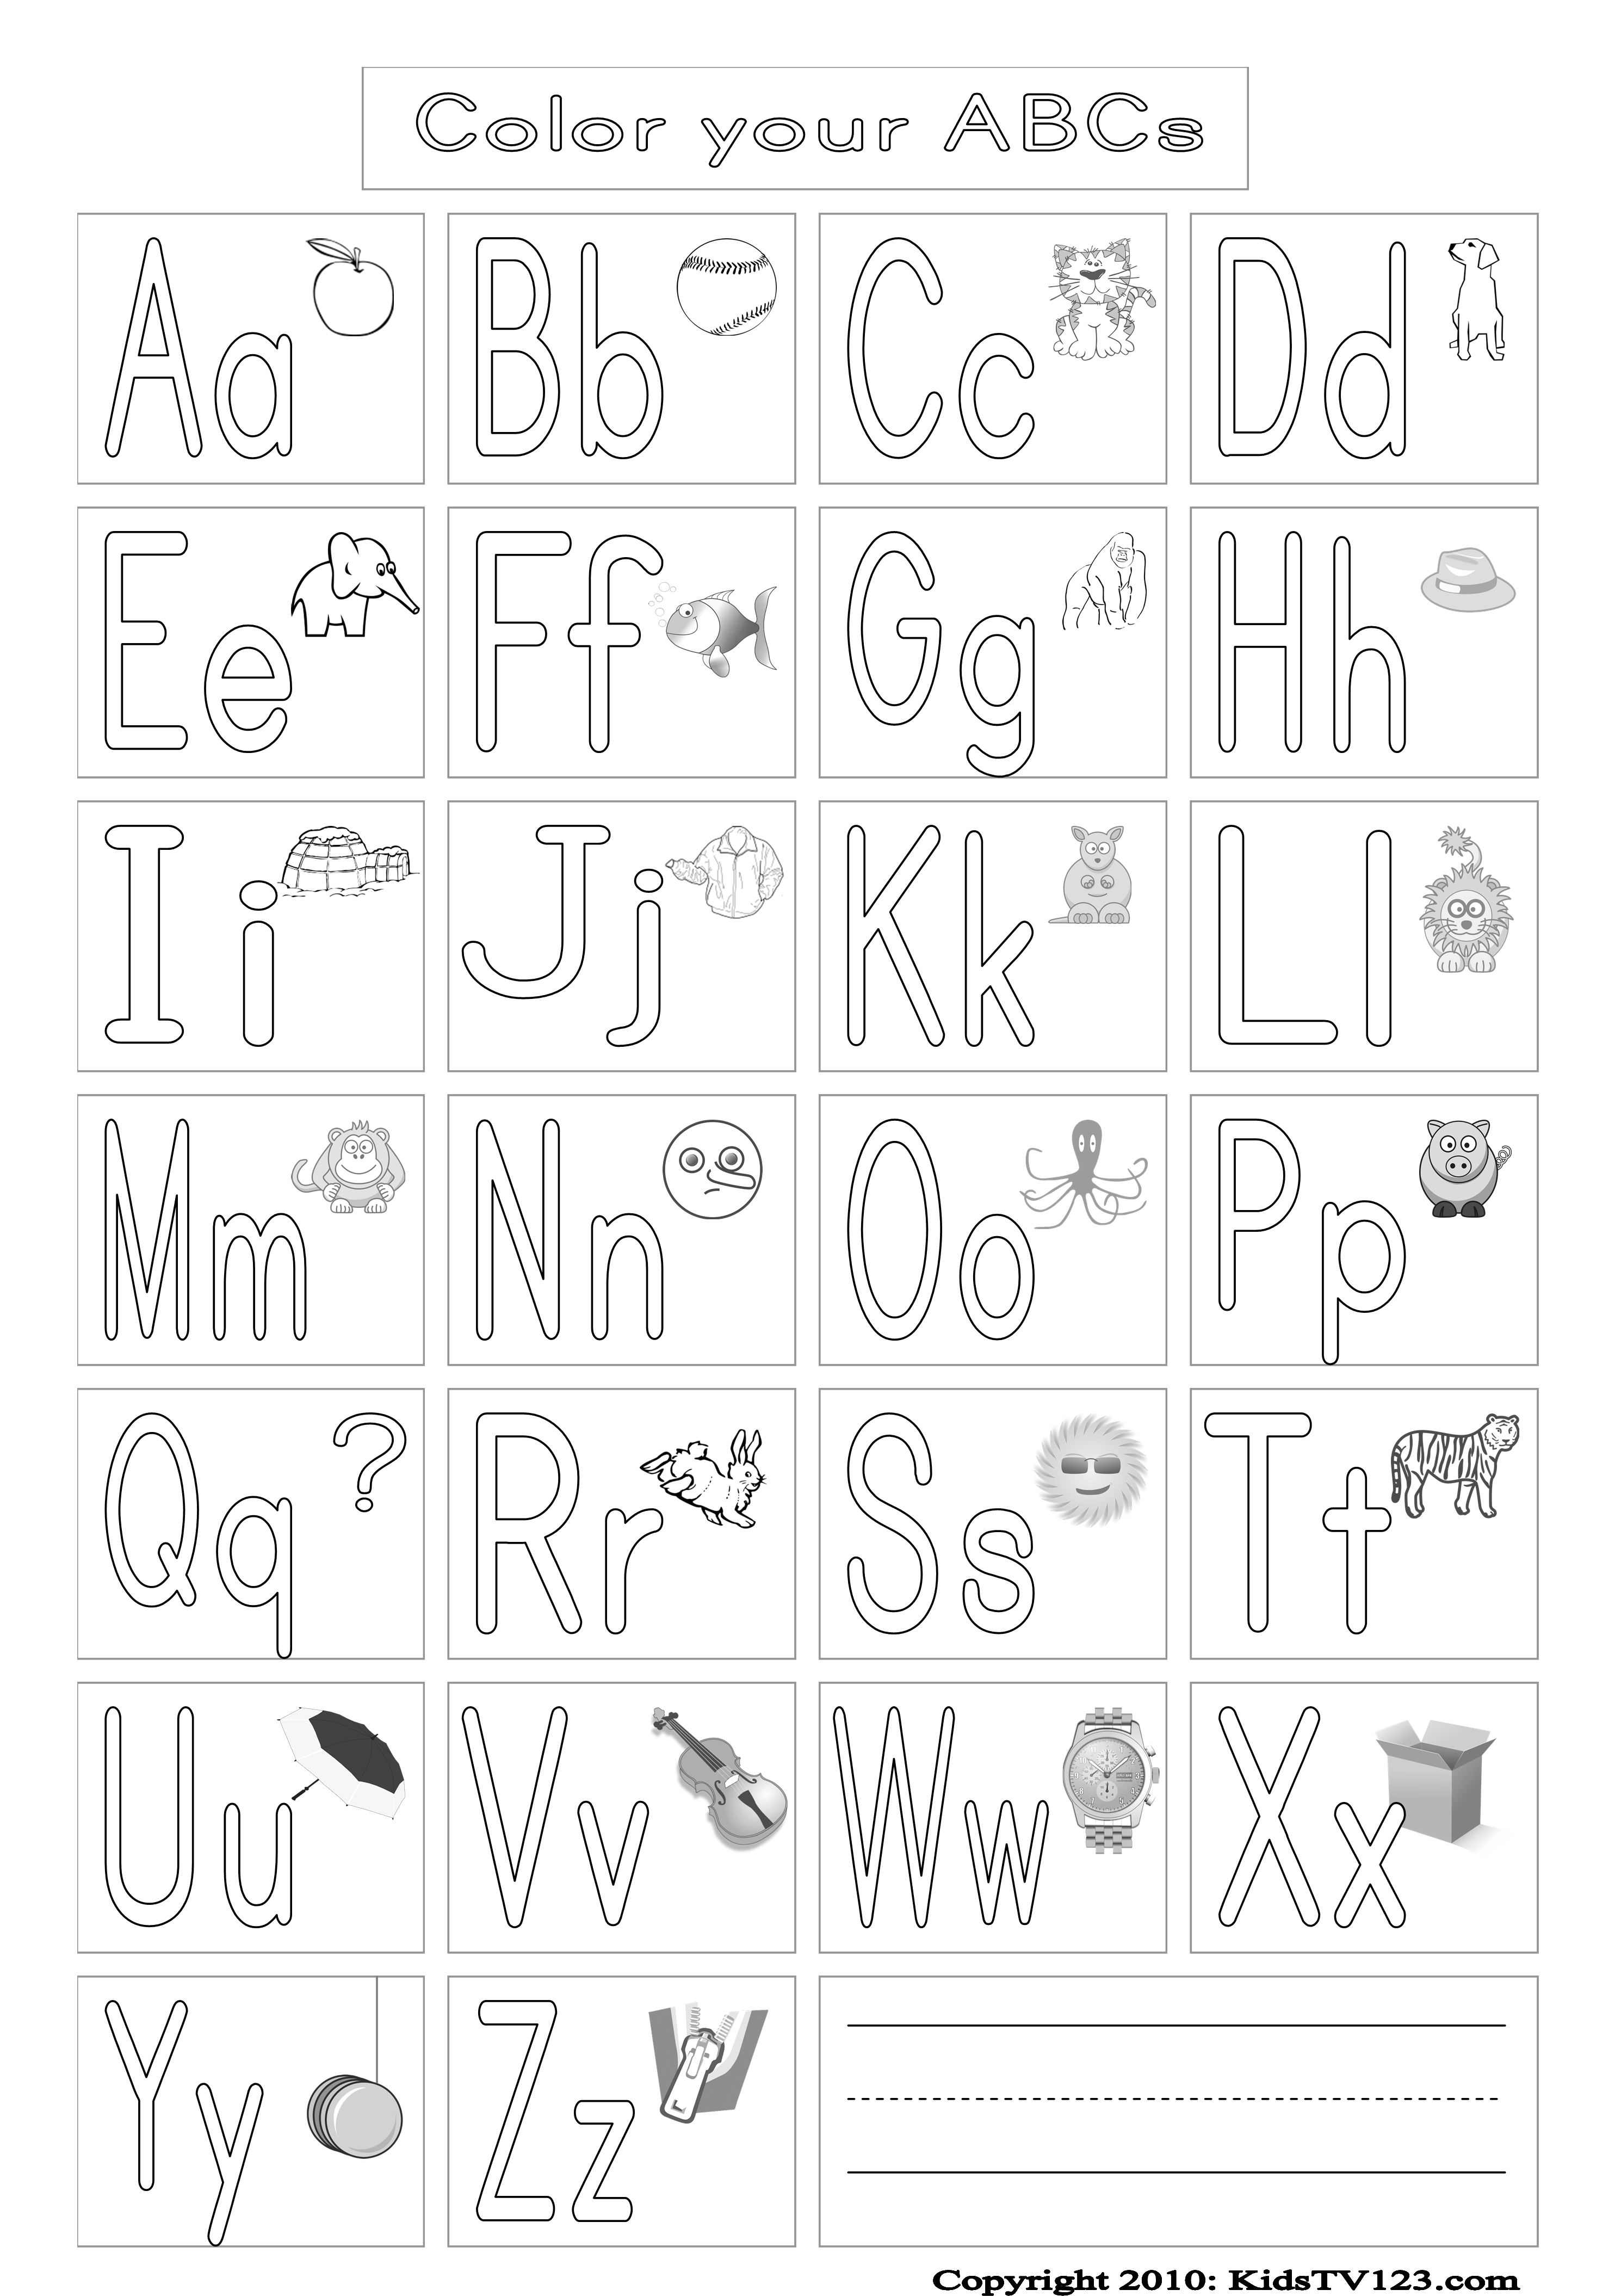 Kidstv123 - Coloring Pages | Abc Coloring Pages, Abc with Alphabet Worksheets To Color